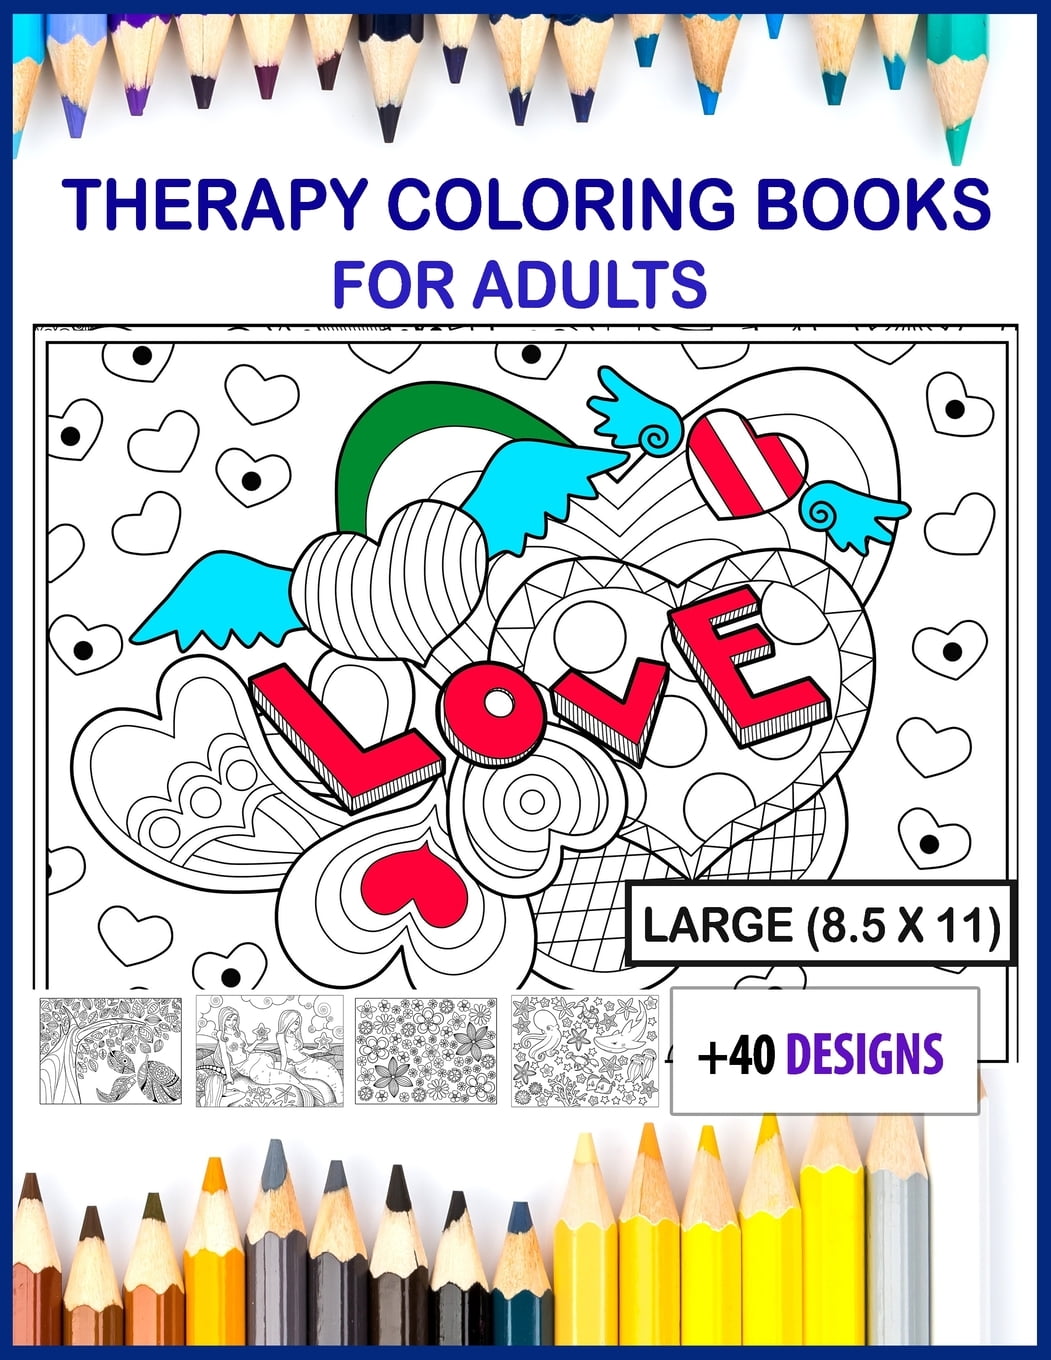 therapy coloring books for adults large print : therapy coloring books